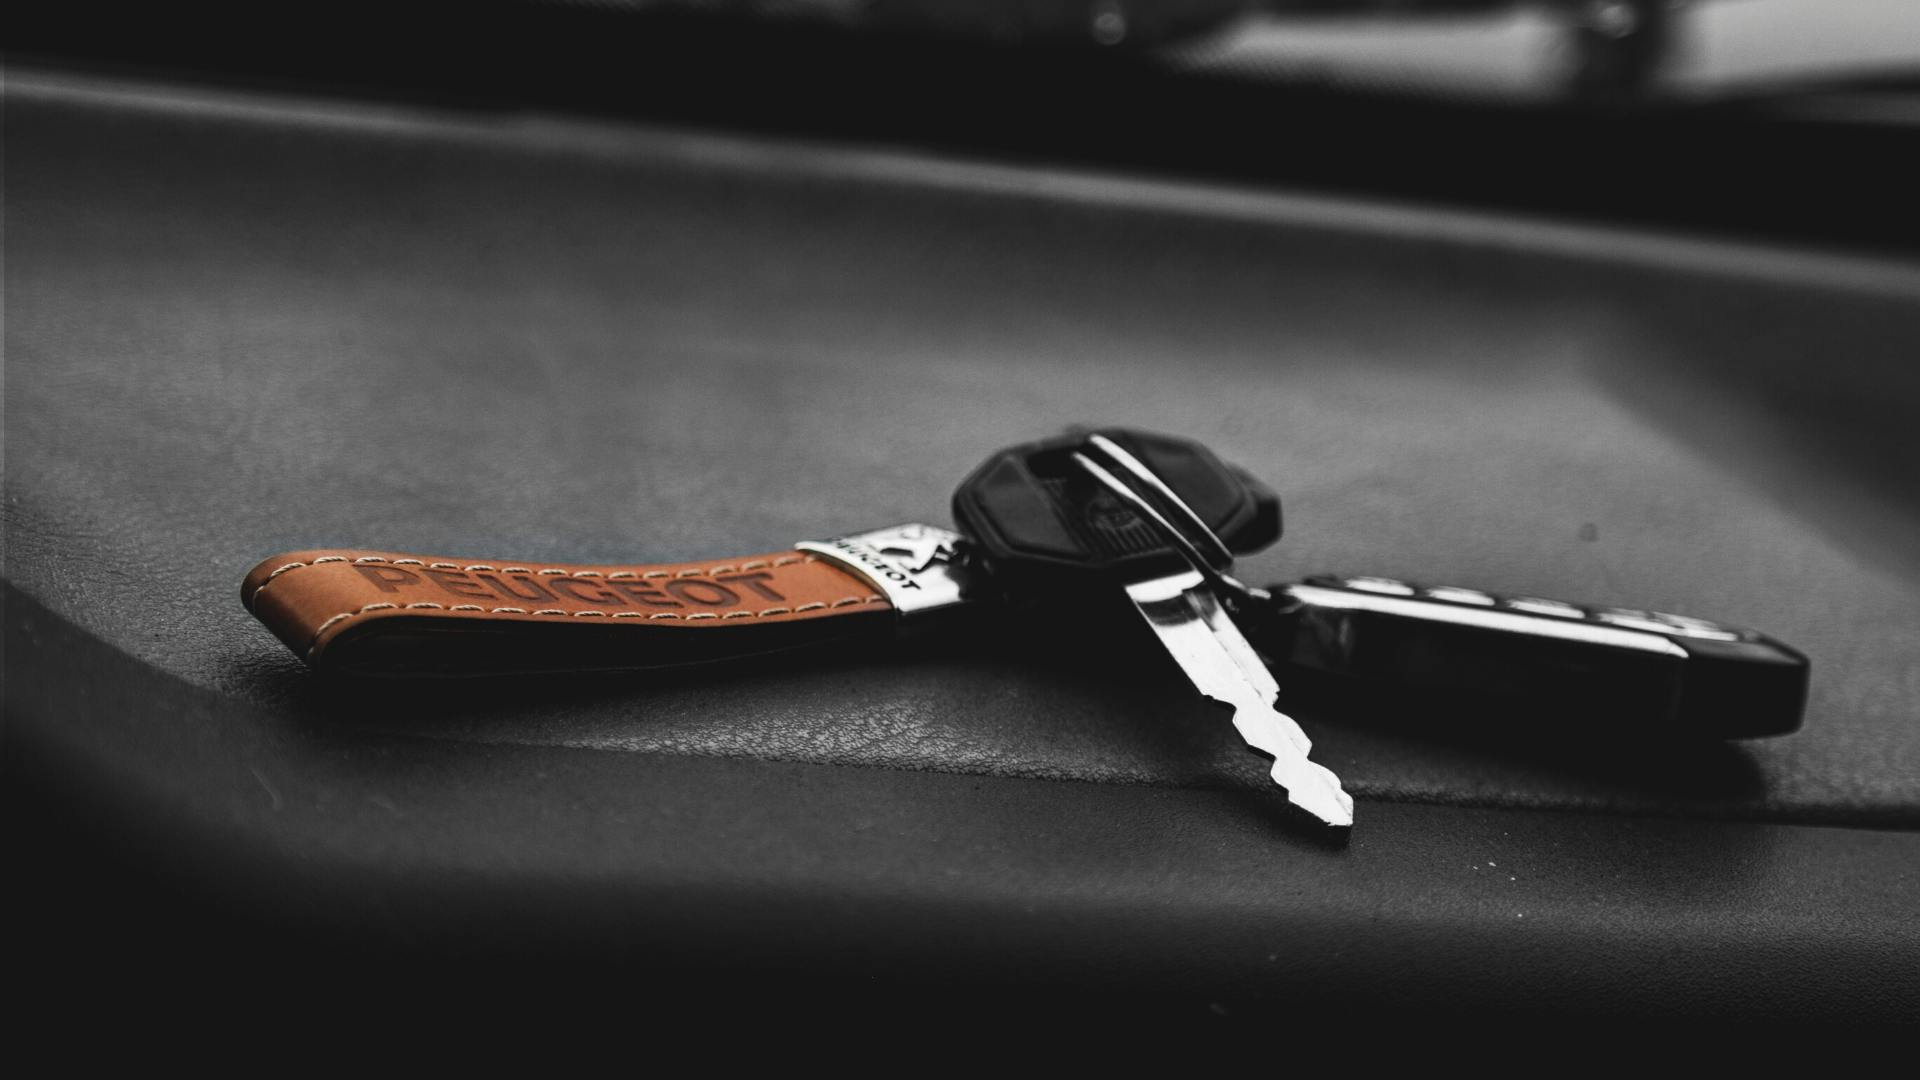 WHAT TO DO IF YOUVE LOST YOUR CAR KEYS